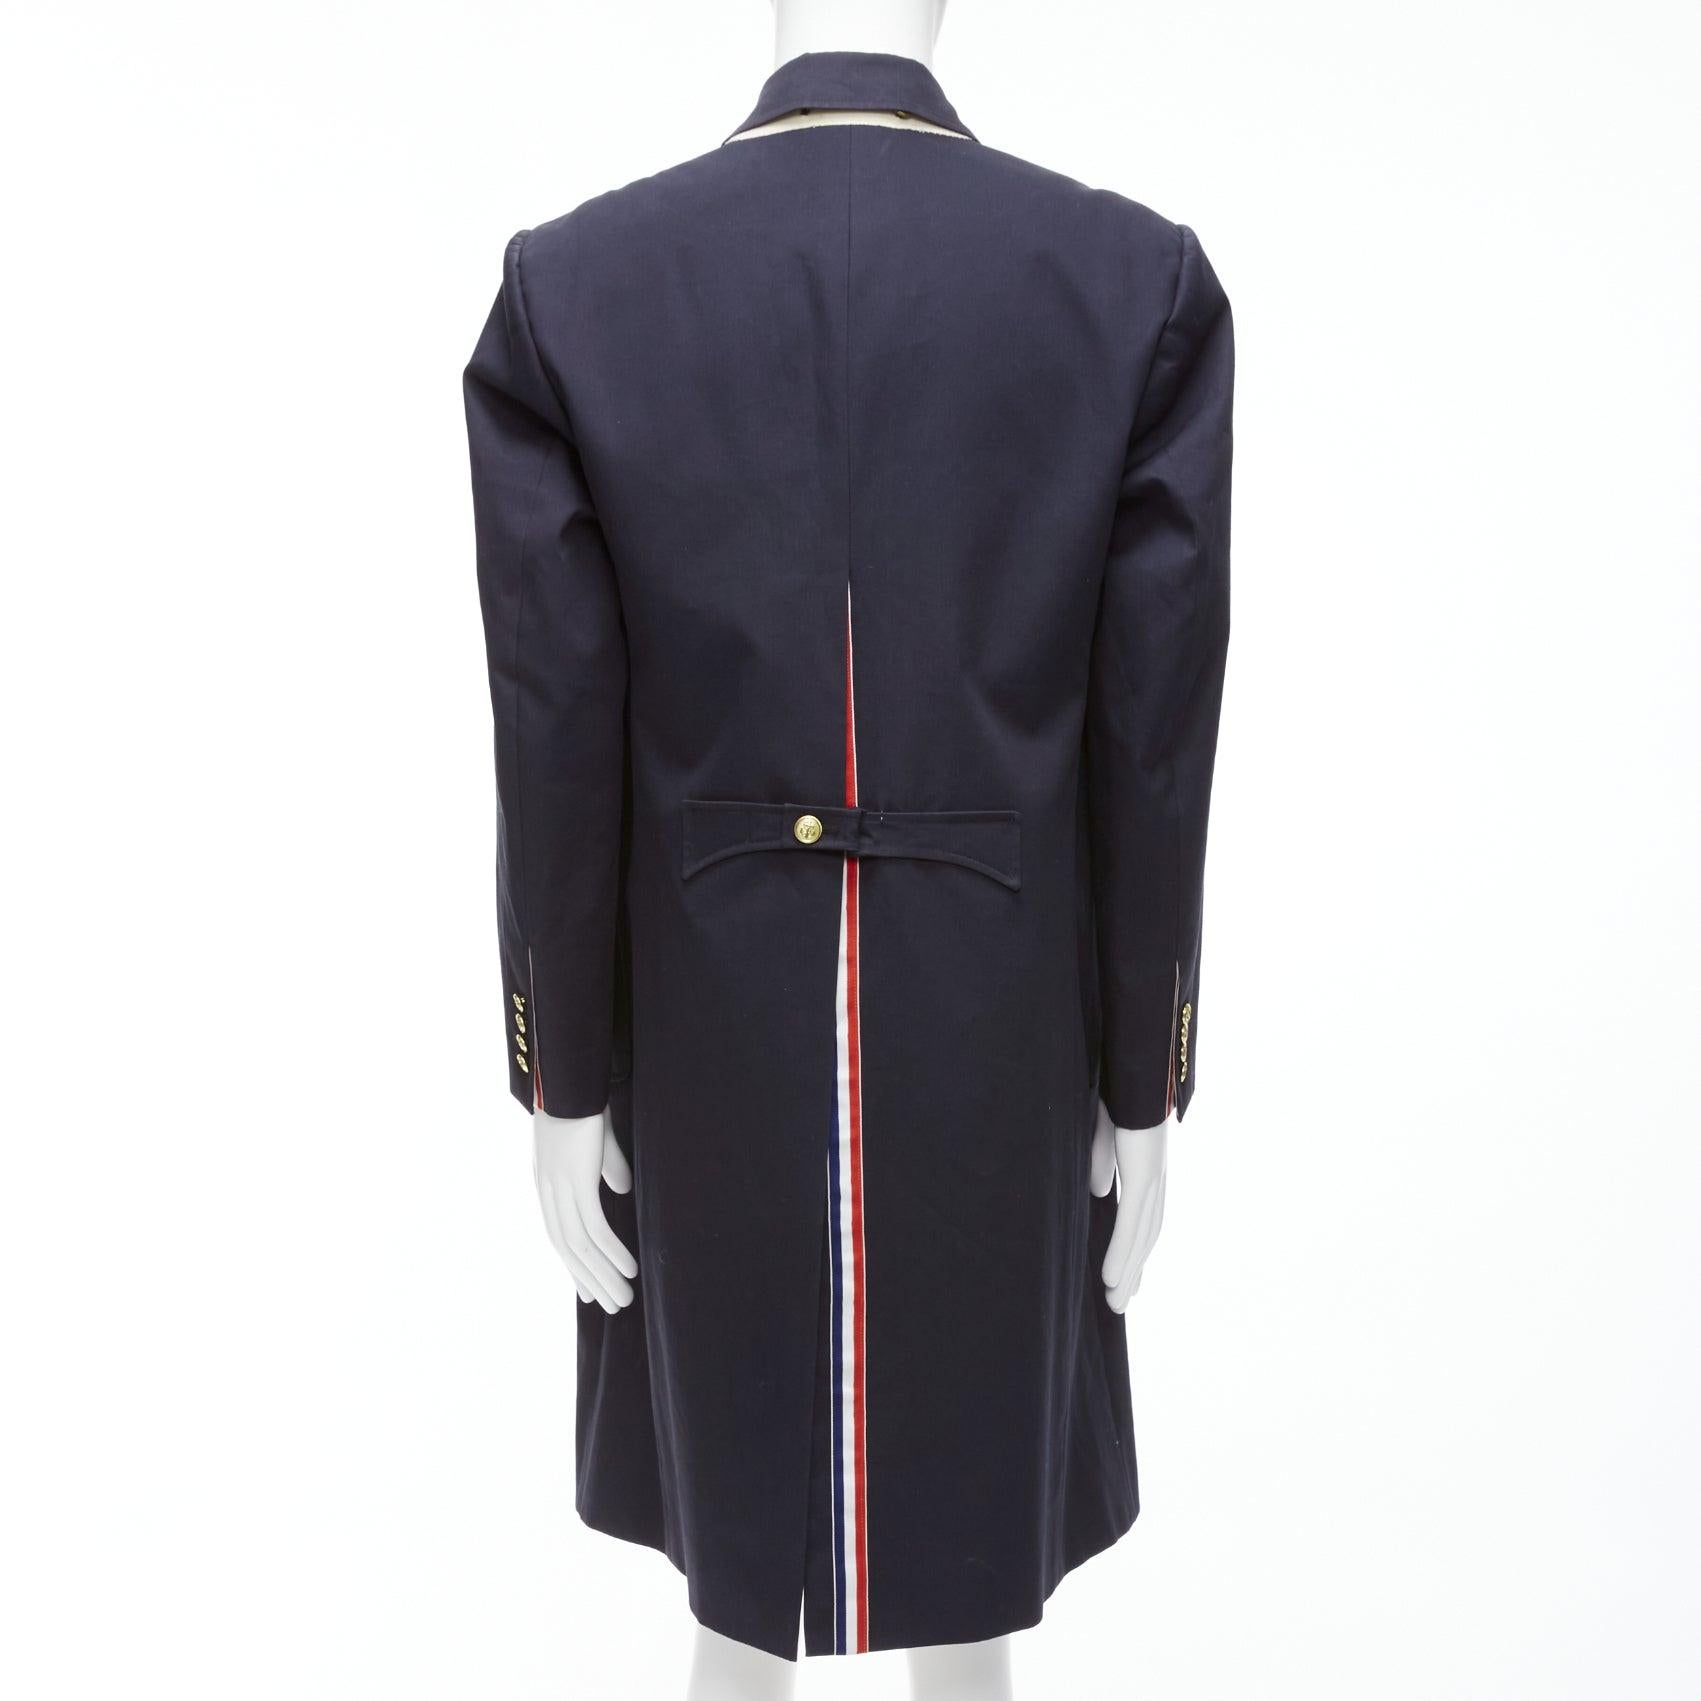 THOM BROWNE 2008 navy gold anchor button loop through boxy longline coat Sz.3 L
Reference: JSLE/A00099
Brand: Thom Browne
Designer: Thom Browne
Collection: 2008
Material: Cotton
Color: Navy, Gold
Pattern: Solid
Closure: Loop Through
Lining: White